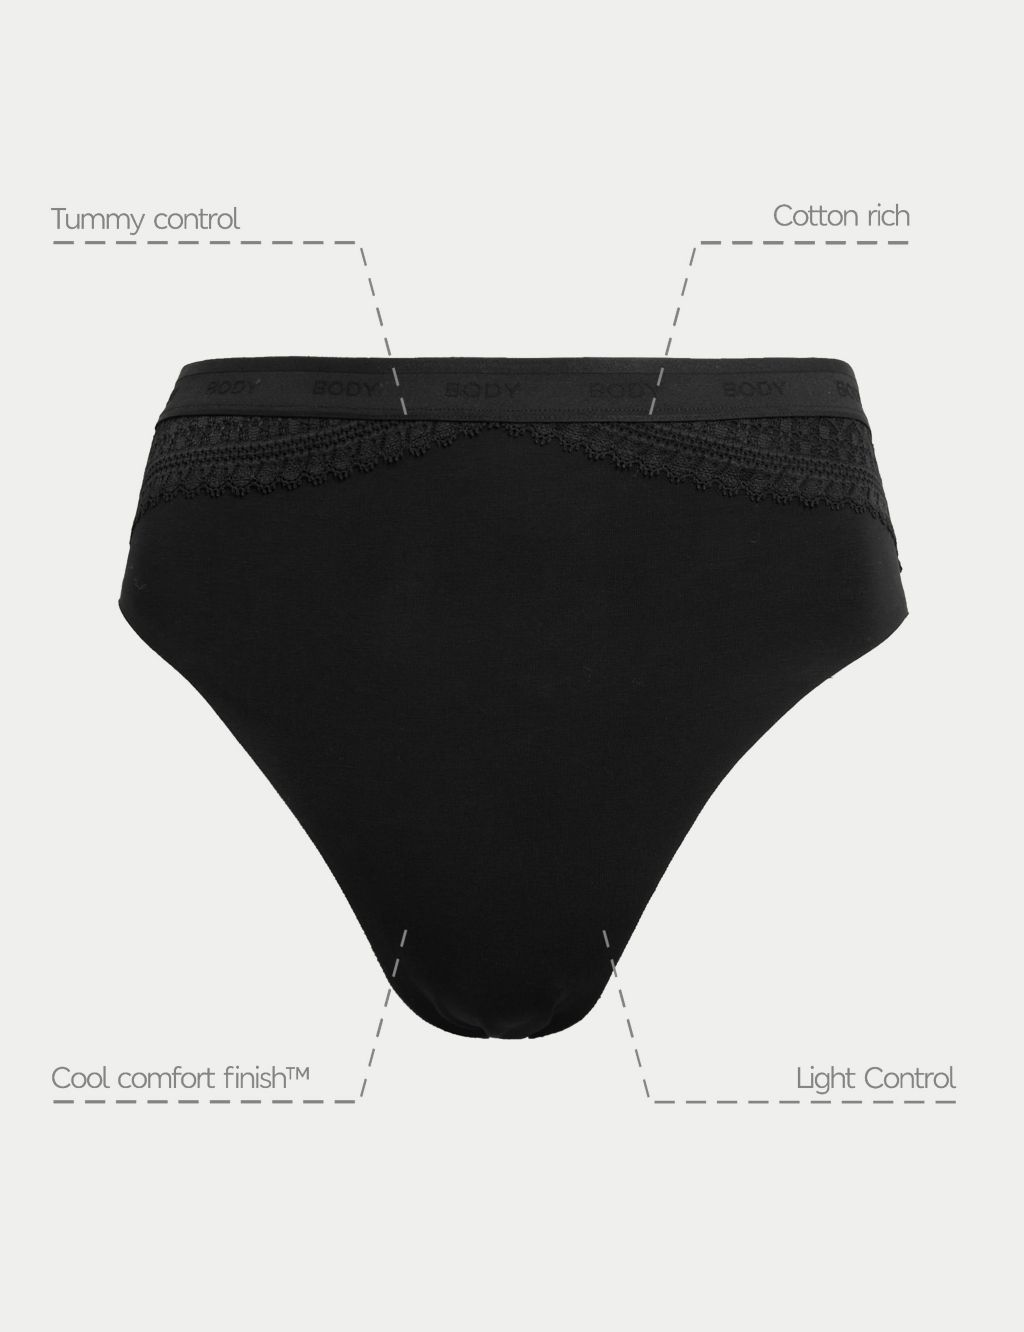 M&S Collection 2pk Firm Control High Leg Knickers - ShopStyle Lingerie